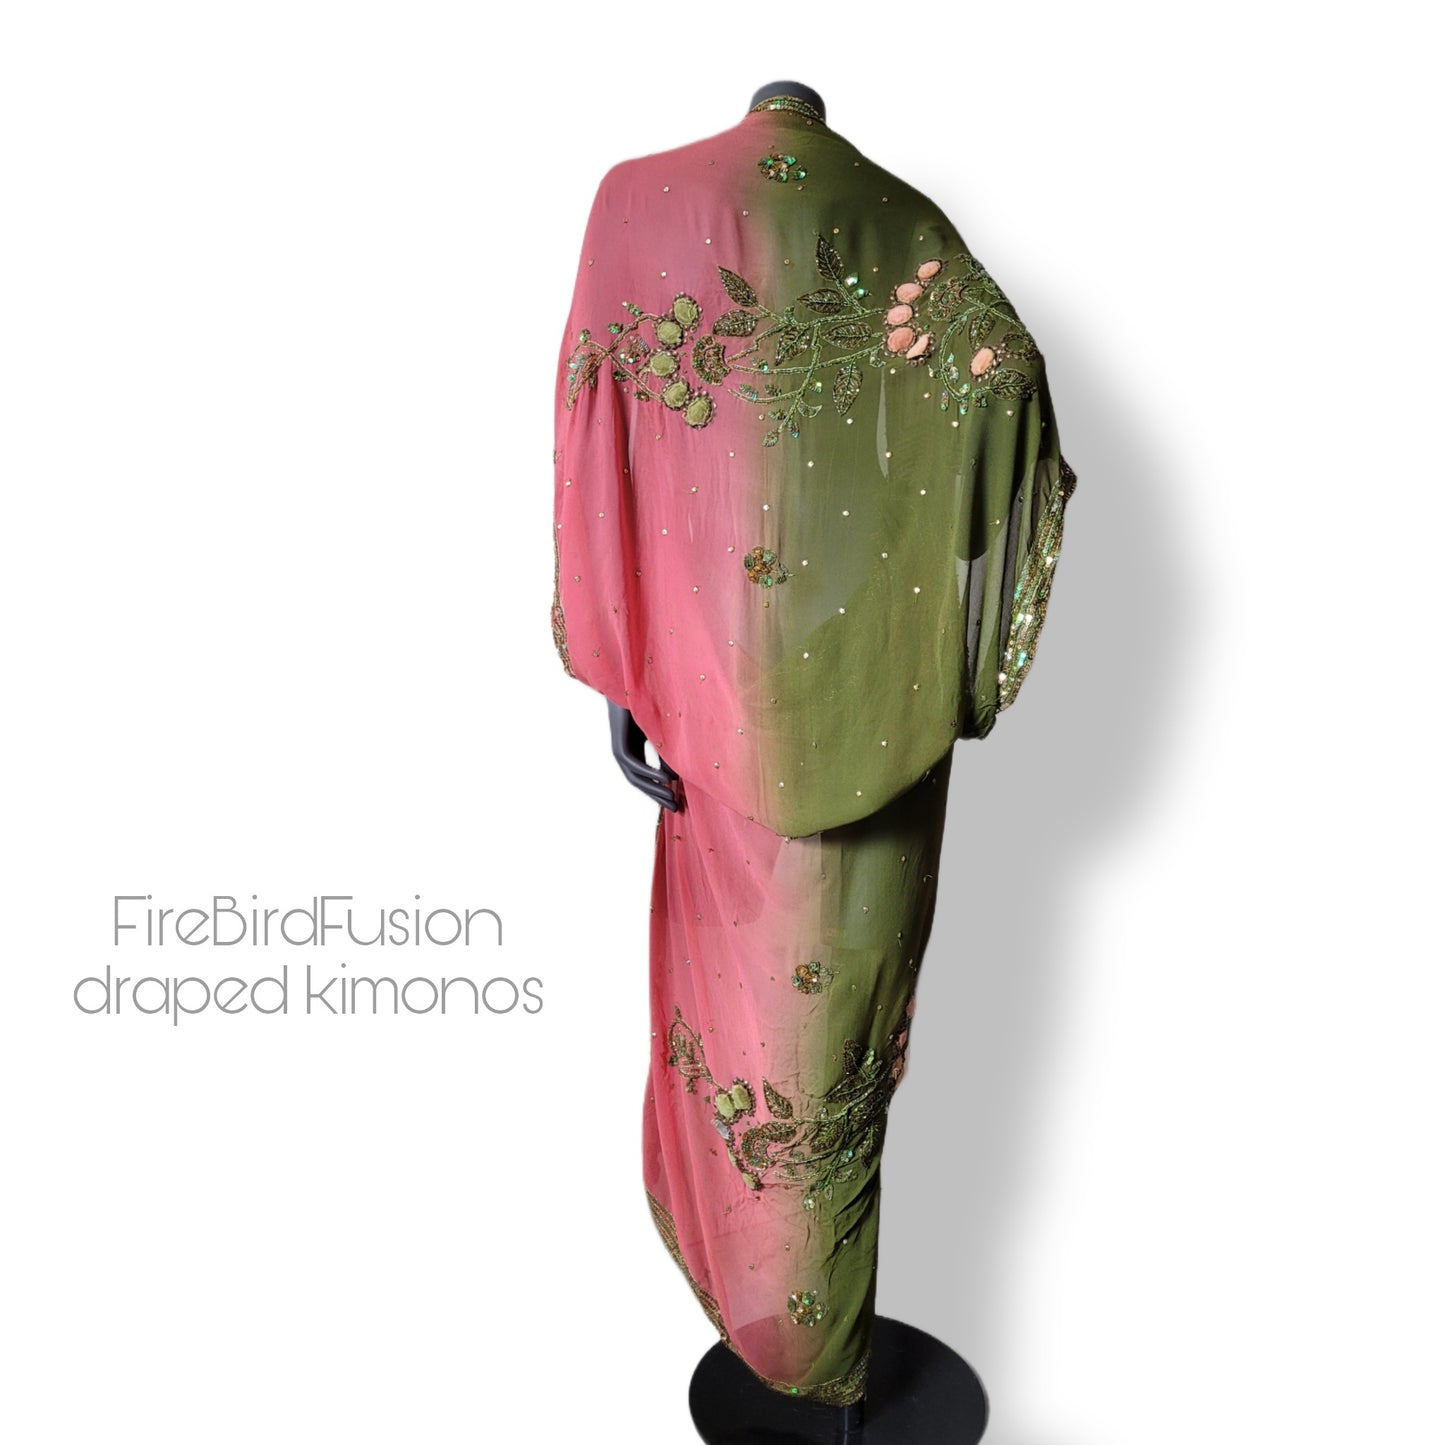 Draped kimono in warm pink and moss green with velvet appliques and beautiful embroidery (S-M)